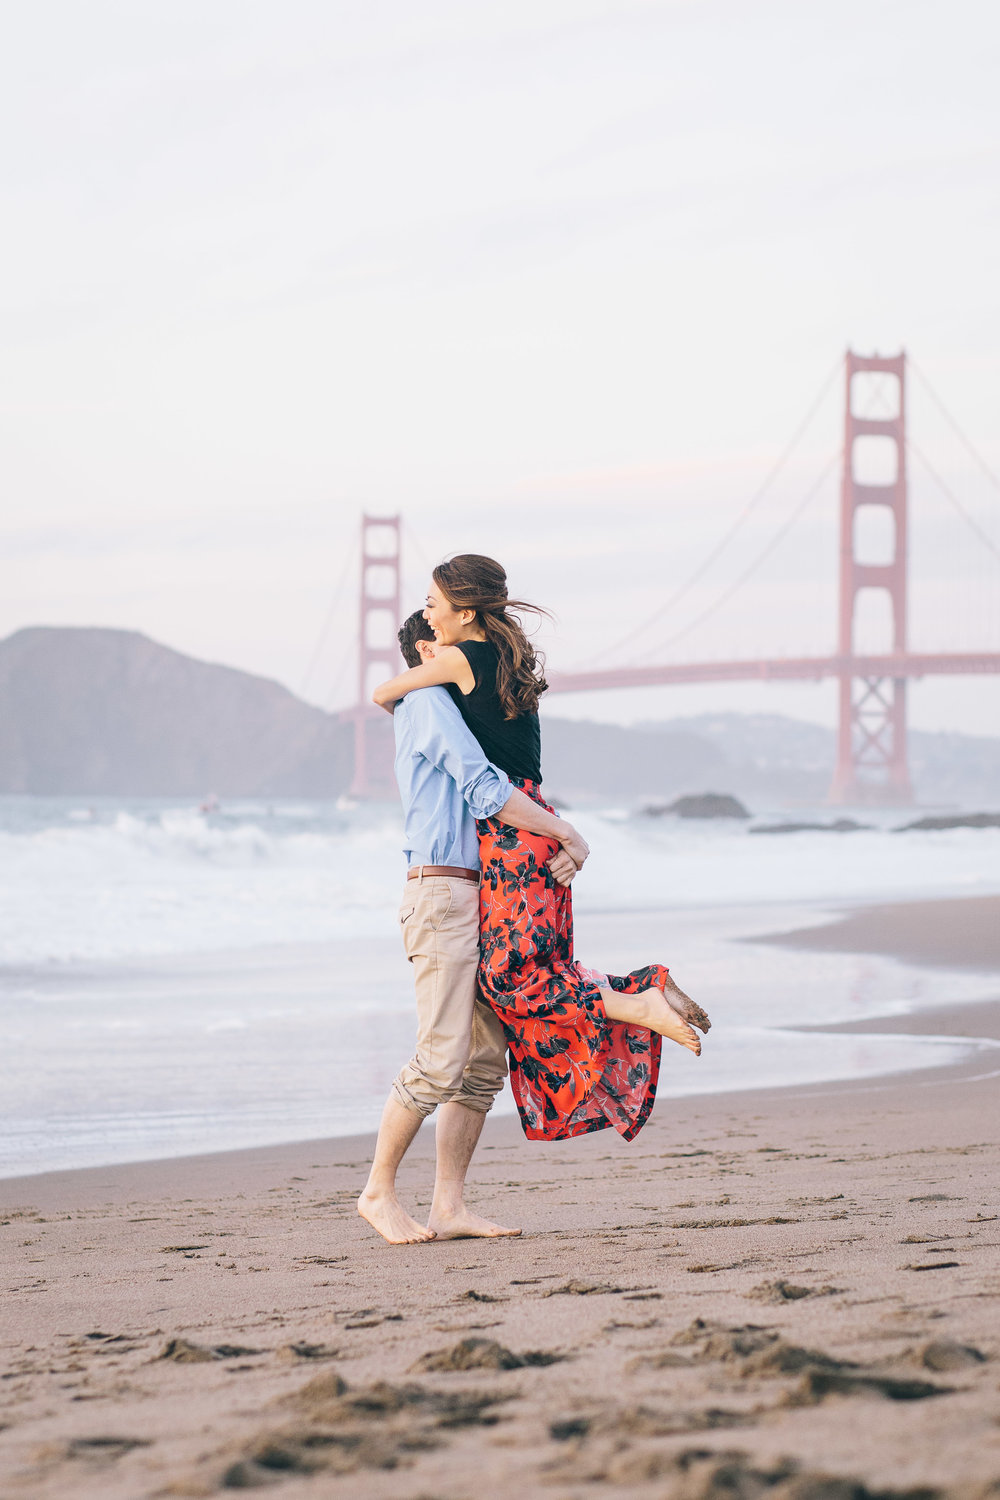 Best Engagement Photo Locations in San Francisco - Baker Beach Engagement Photos by JBJ Pictures (5).jpg